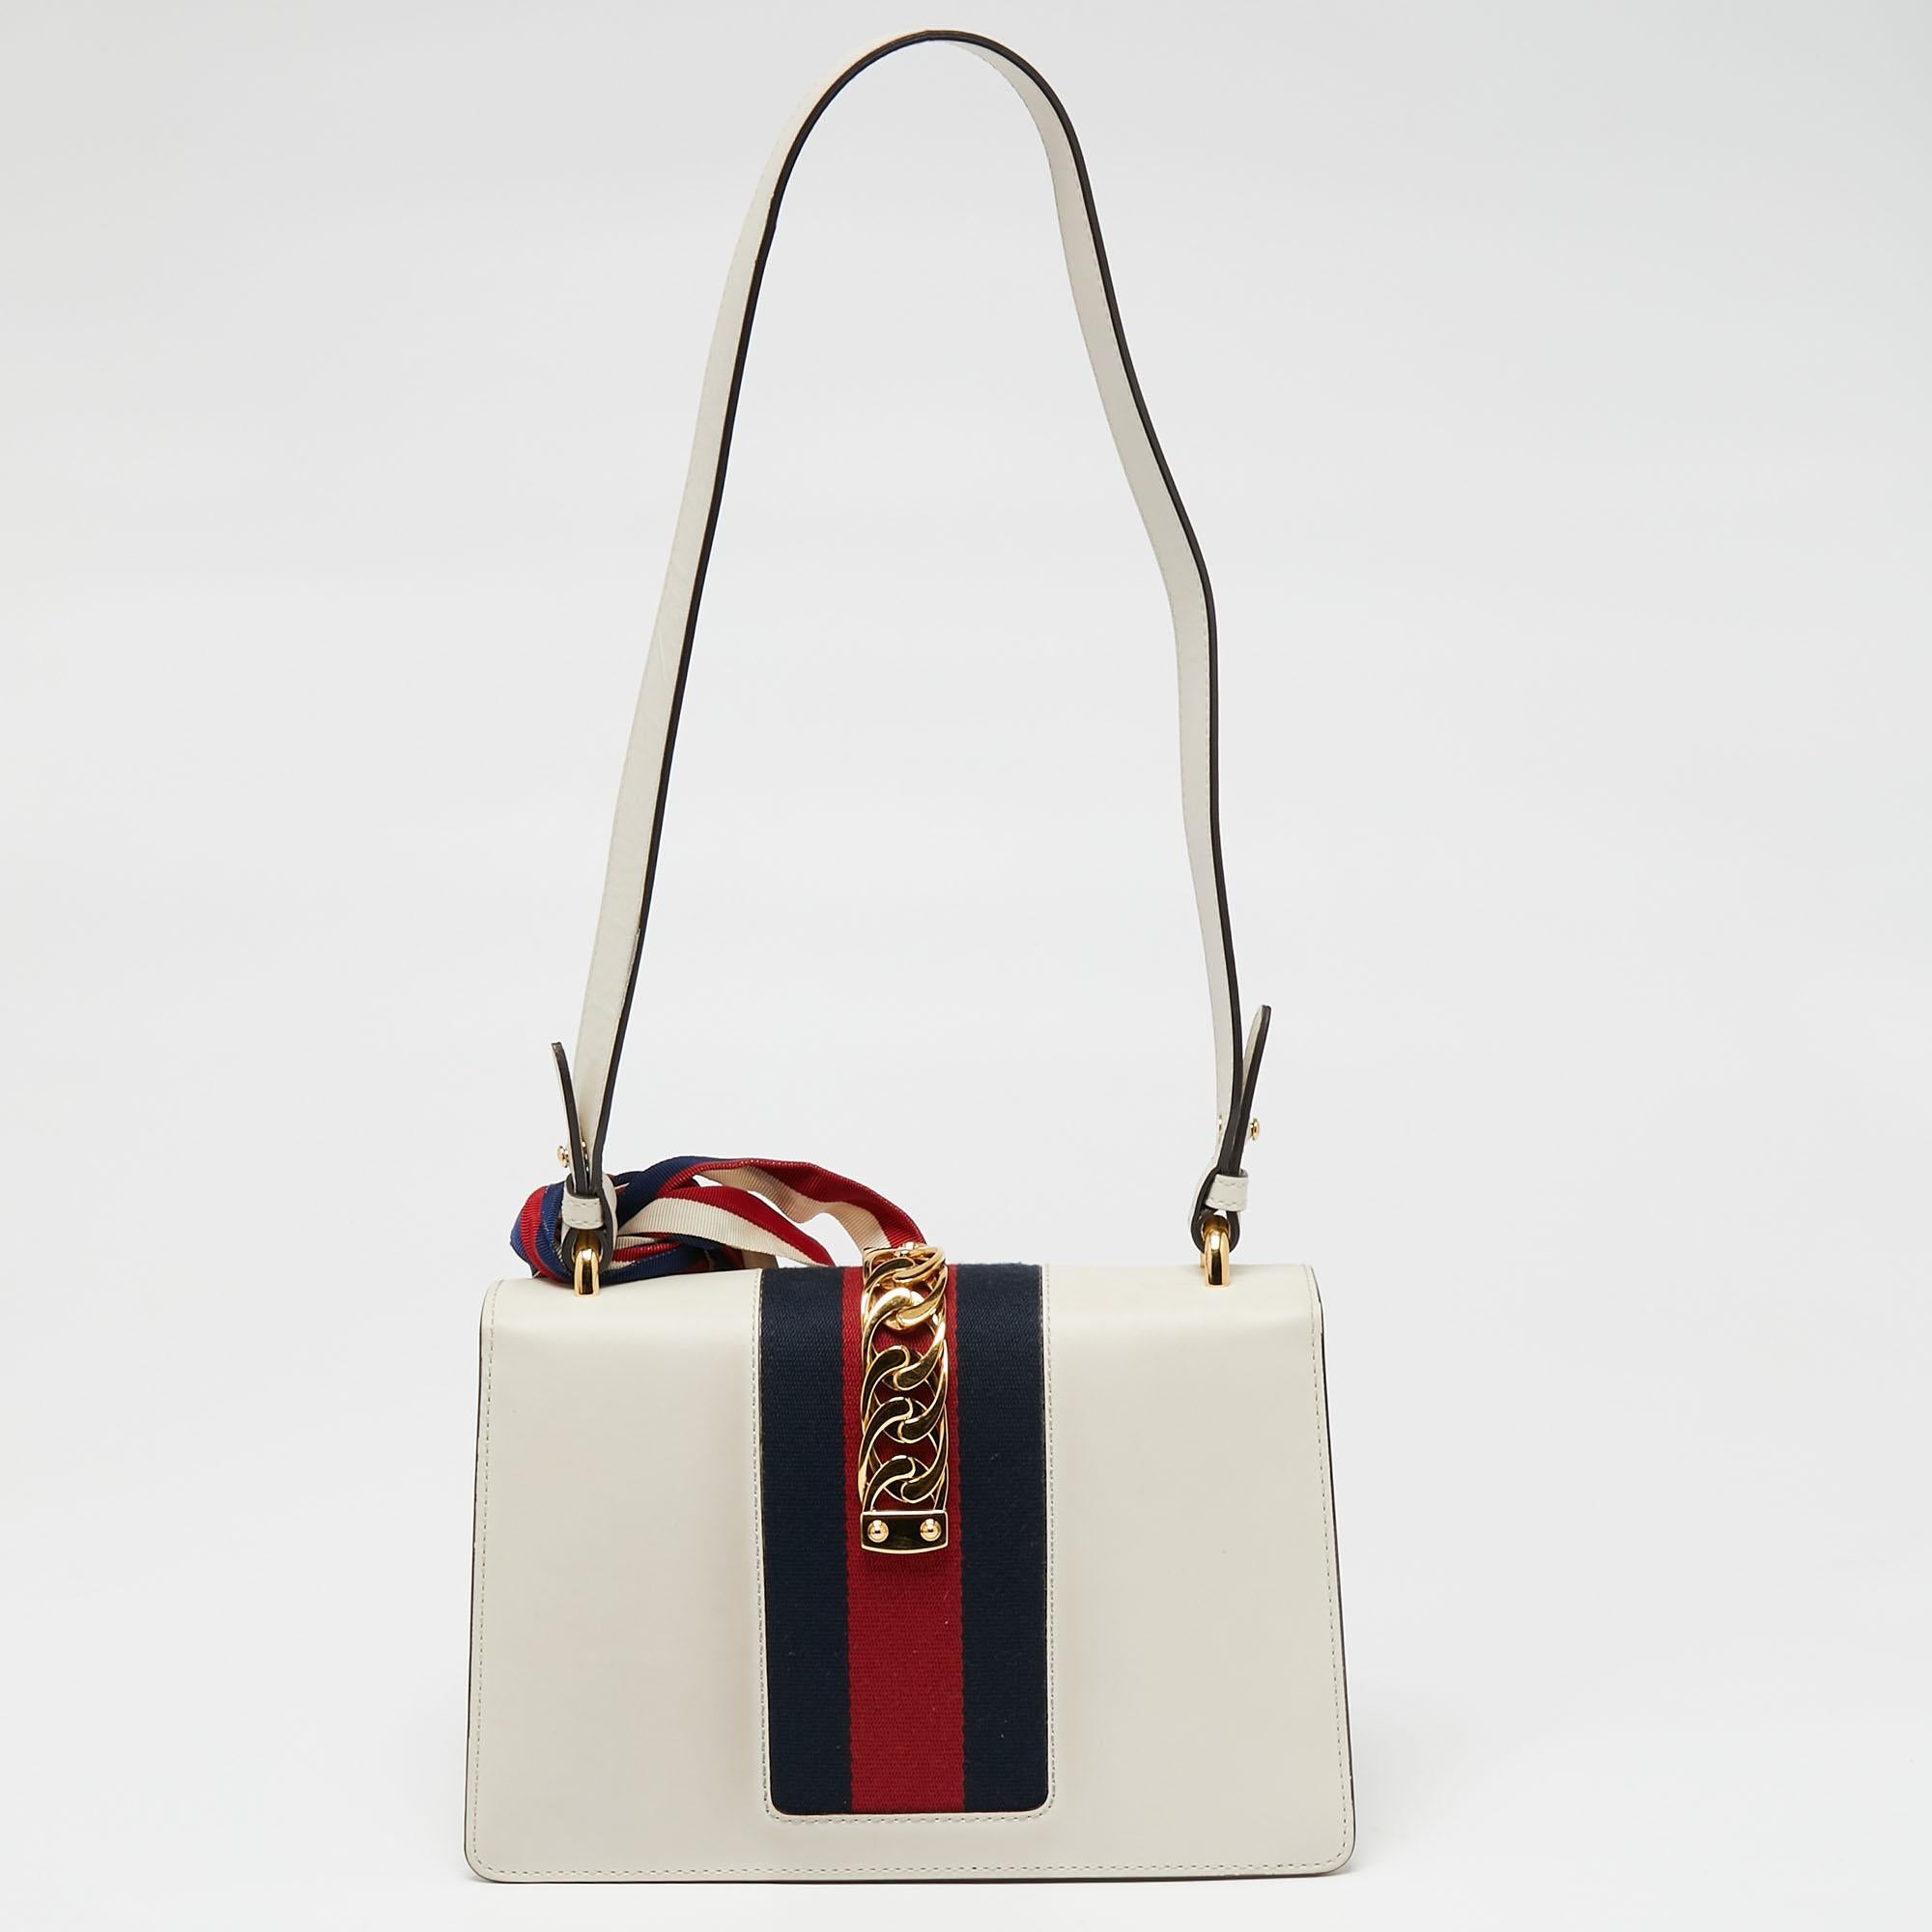 The gorgeous Gucci shoulder bag will perfectly complement all your outfits. It has an elegant, structured silhouette highlighted by a decorative trim on the flap. The interior is sized well to carry your daily essentials with ease.

Includes: Strap,